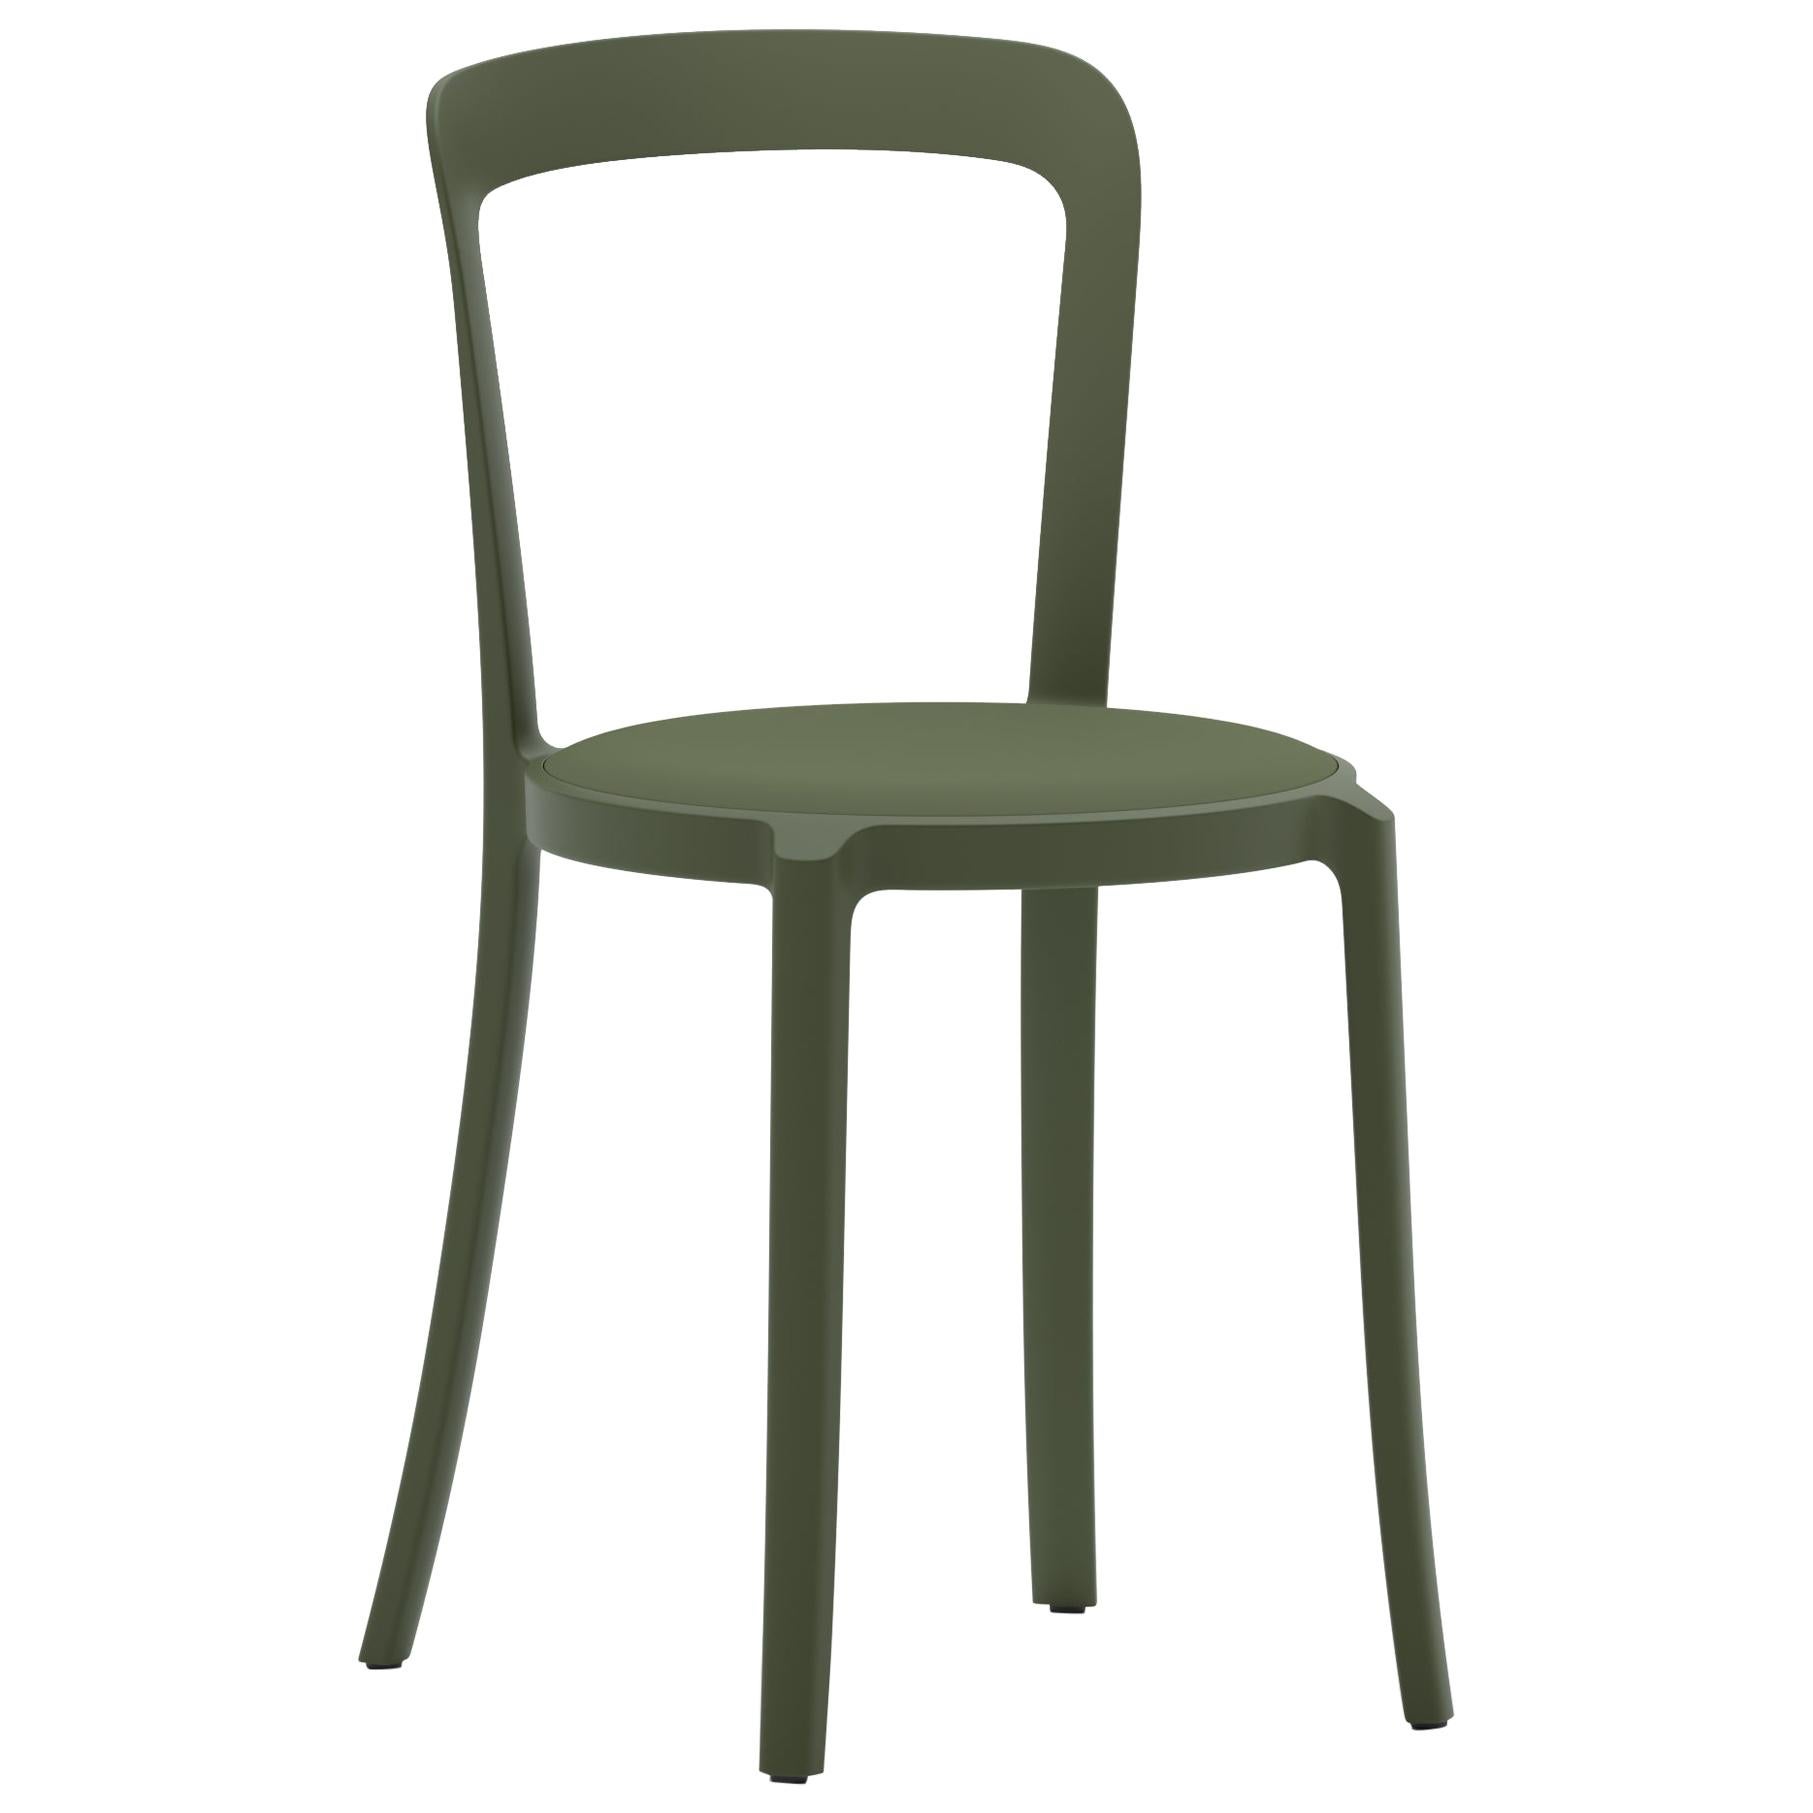 On & On Stacking Chair in Plastic with Green Fabric 1 by Barber & Osgerby For Sale